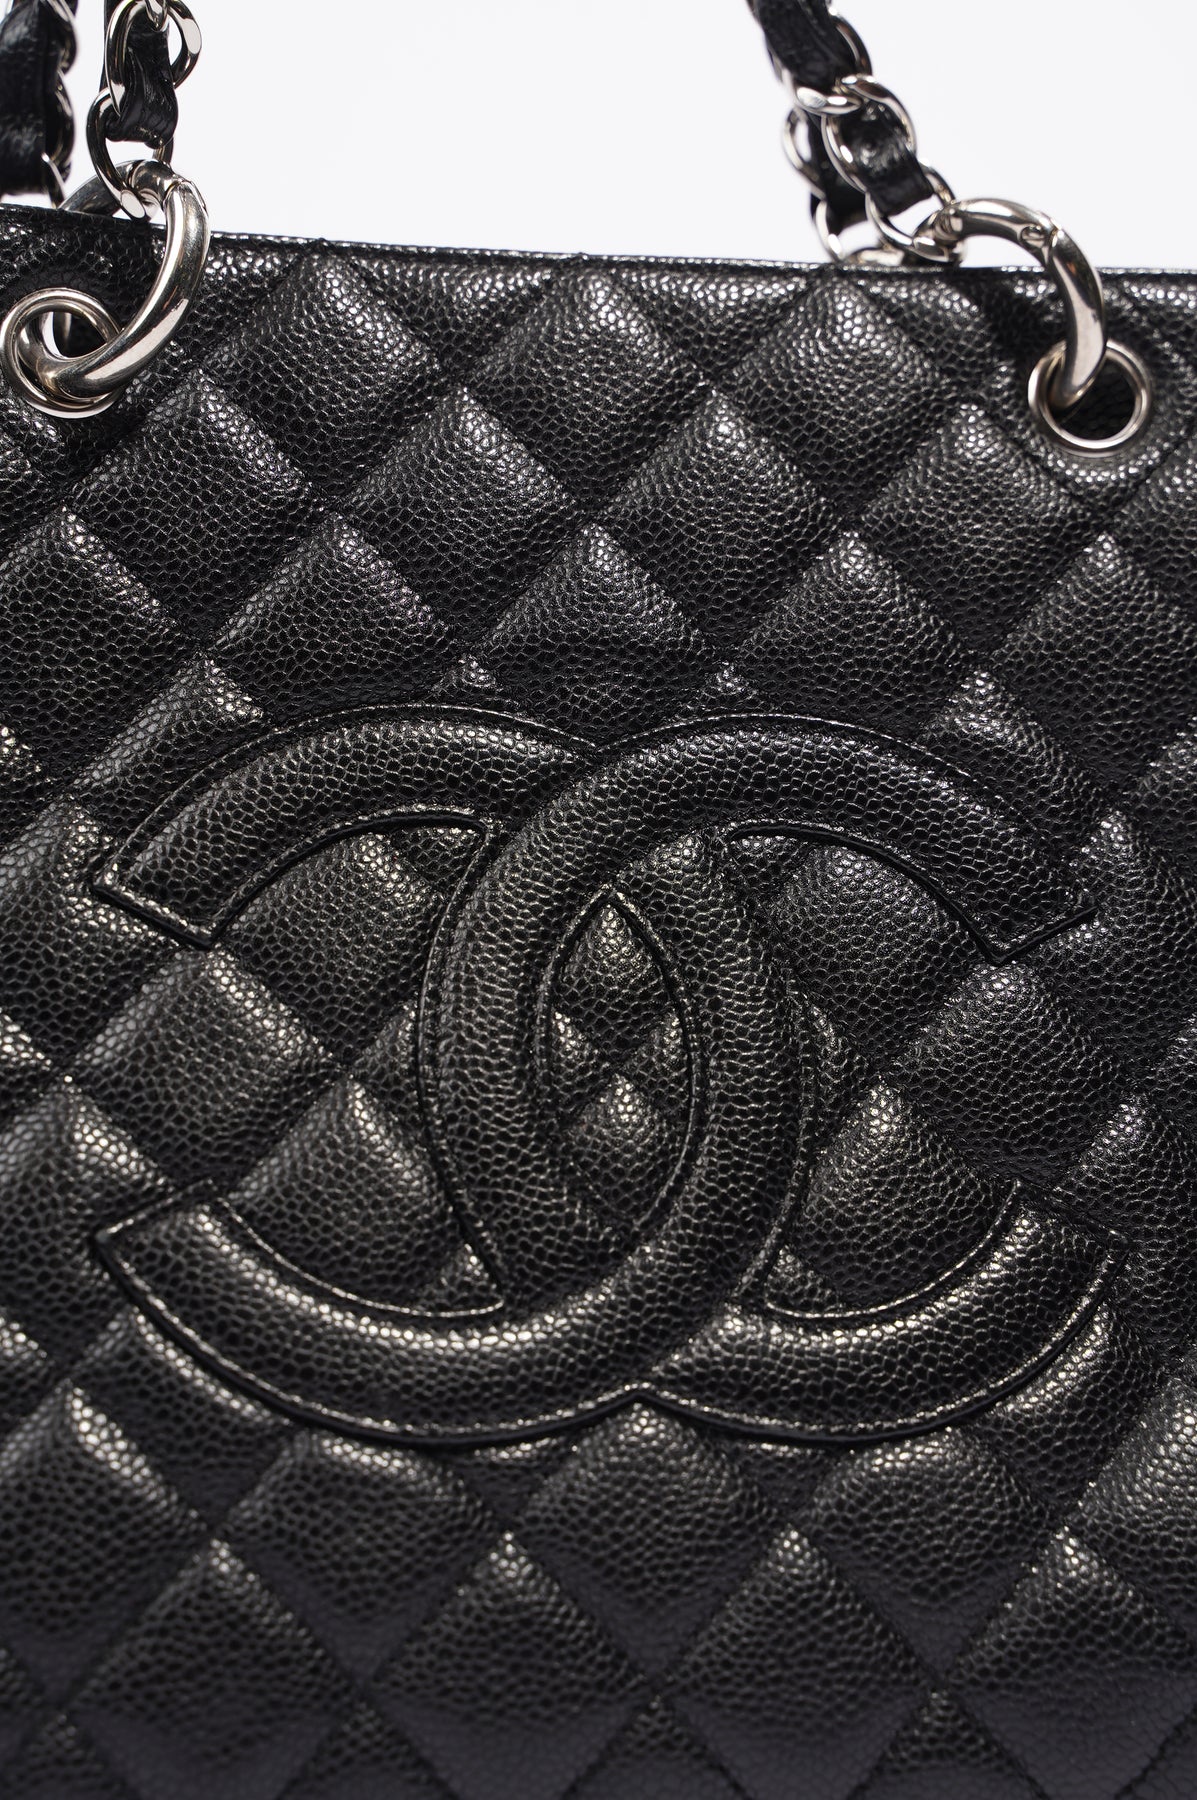 Chanel Grand shopping tote – thankunext.us